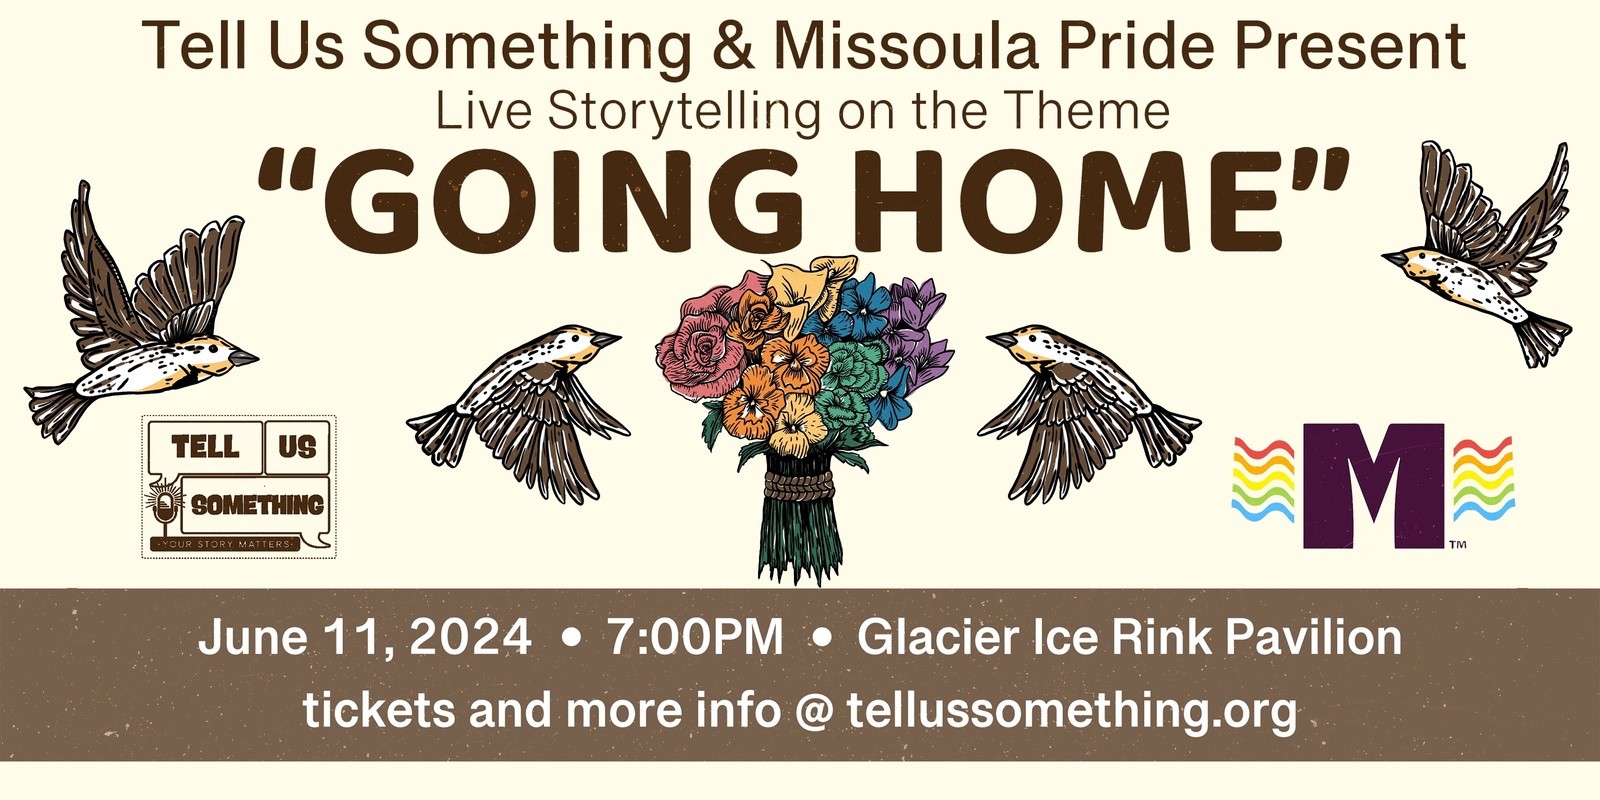 Banner image for Tell Us Something and Missoula Pride present live storytelling on the theme "Going Home"